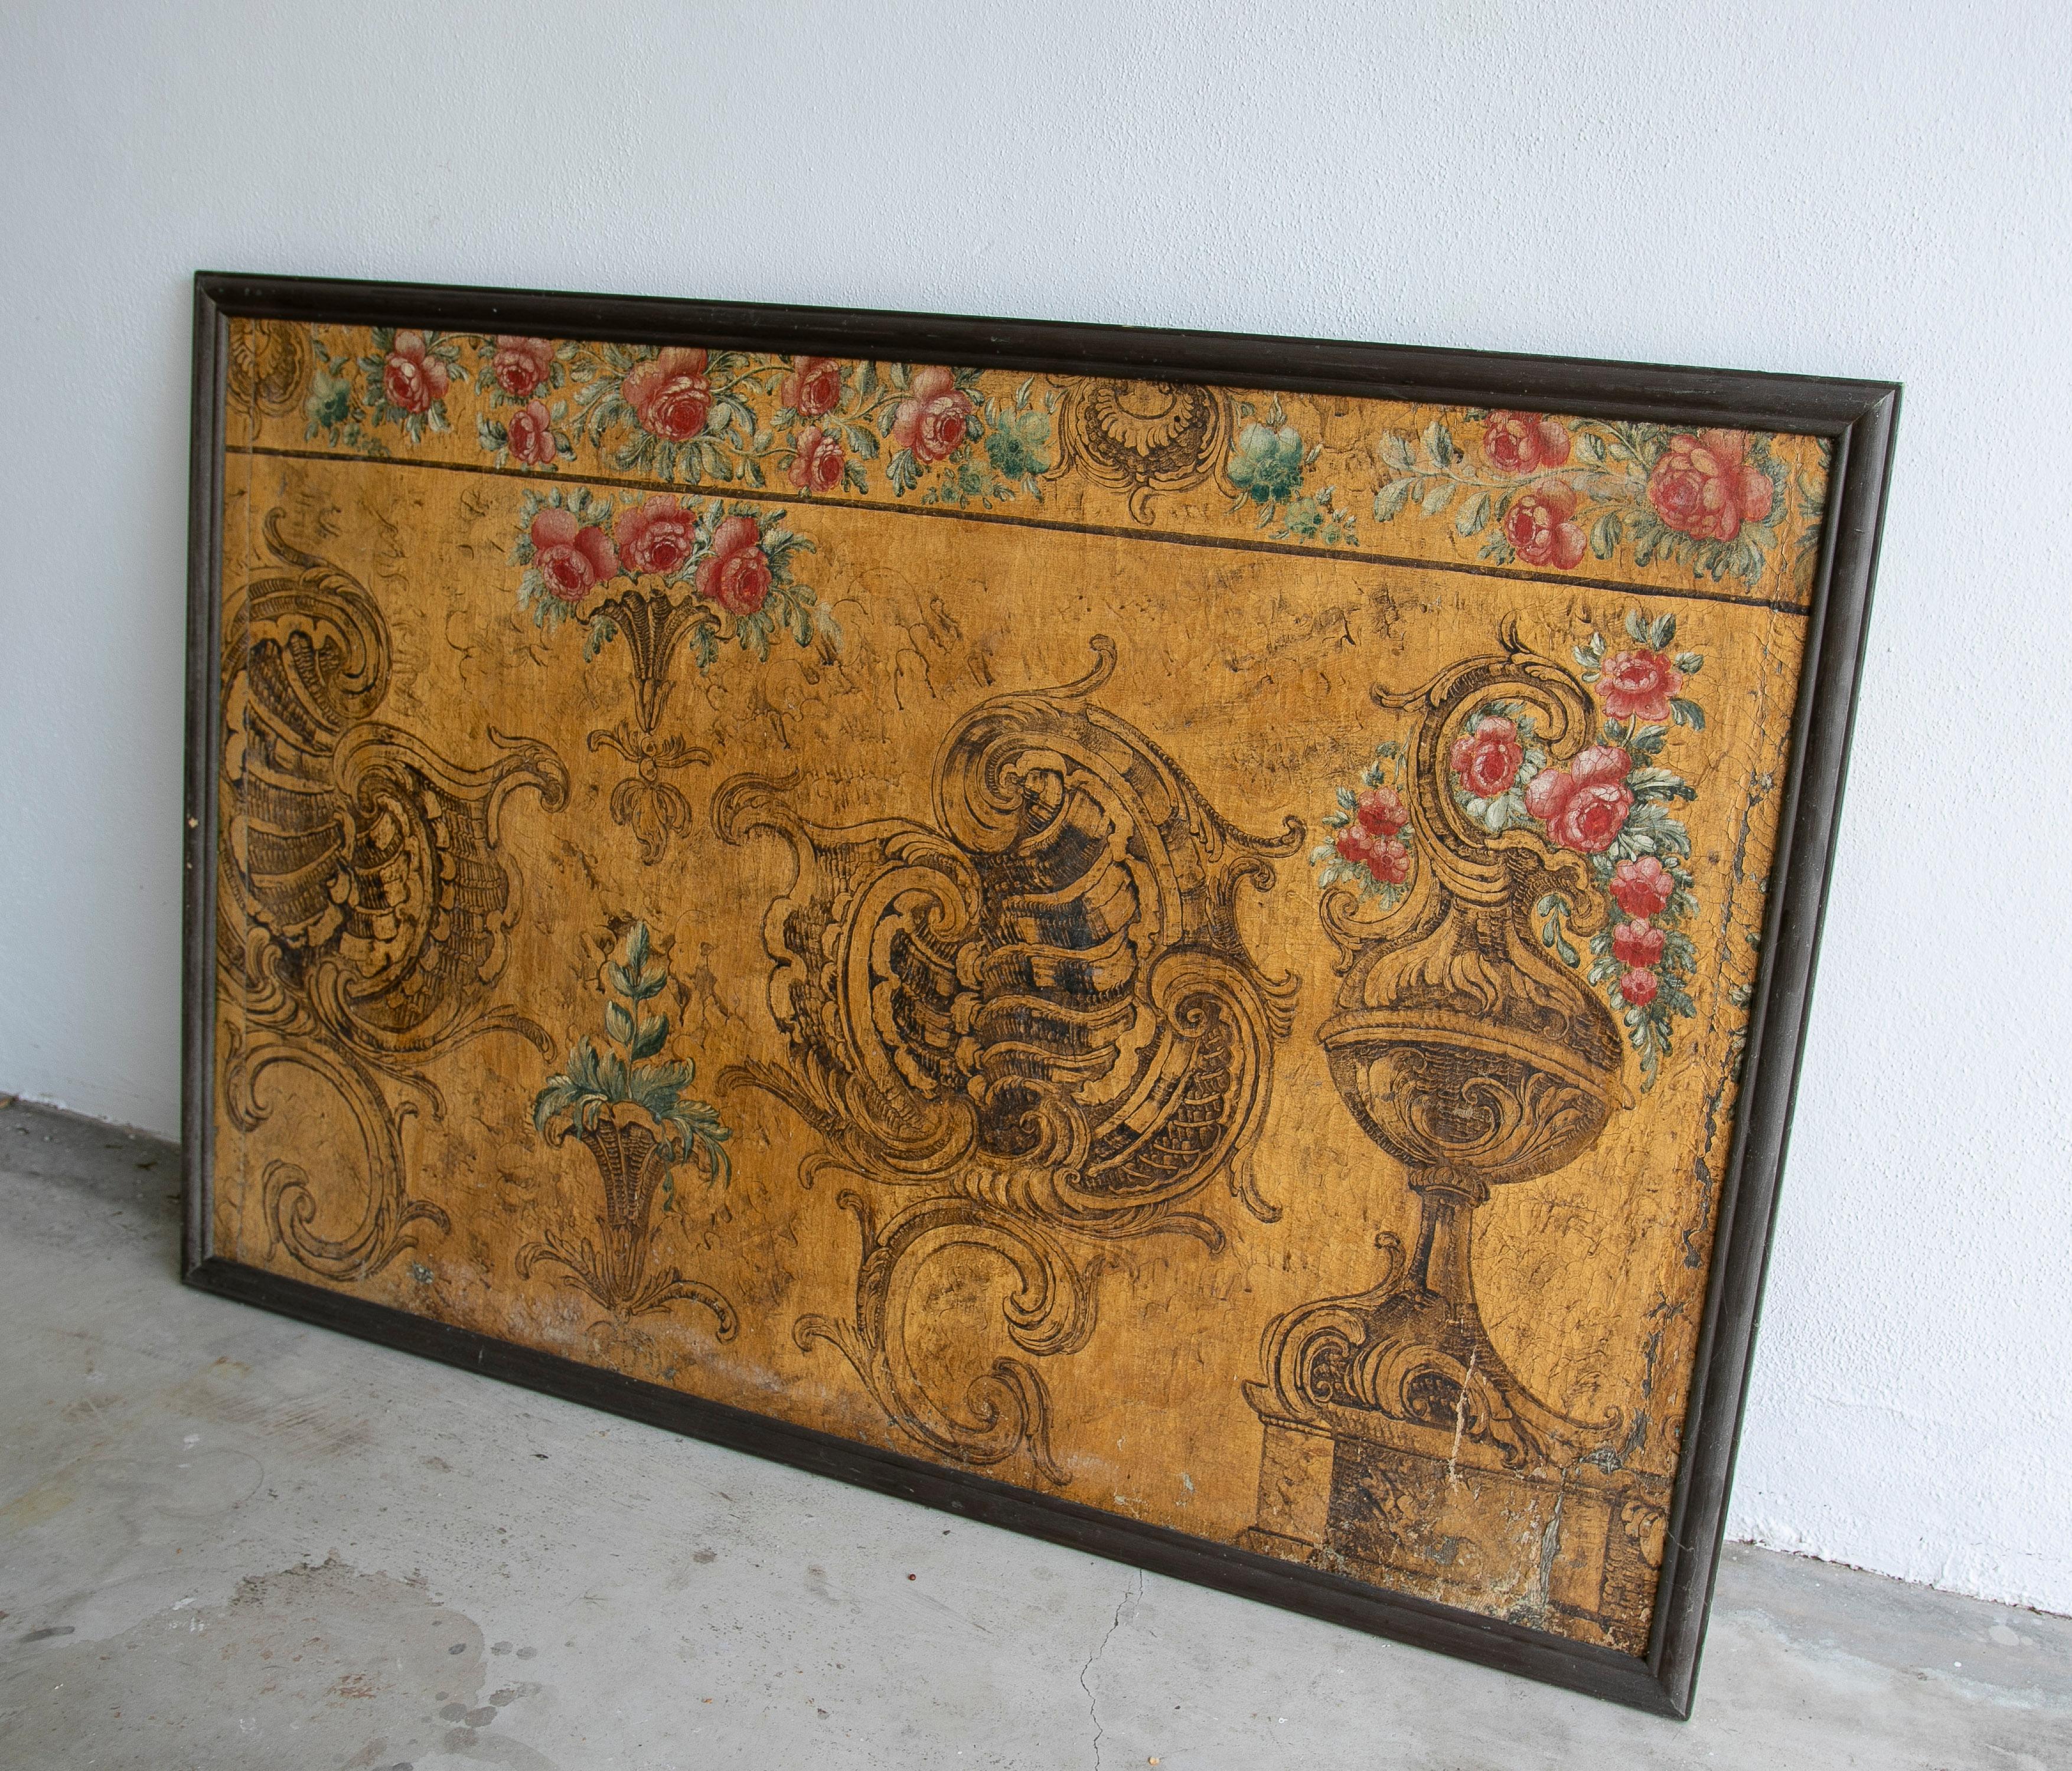 Hand-Painted Mid 18th Century Italian Late Baroque / Rococo Oil on Cloth Framed Painting For Sale